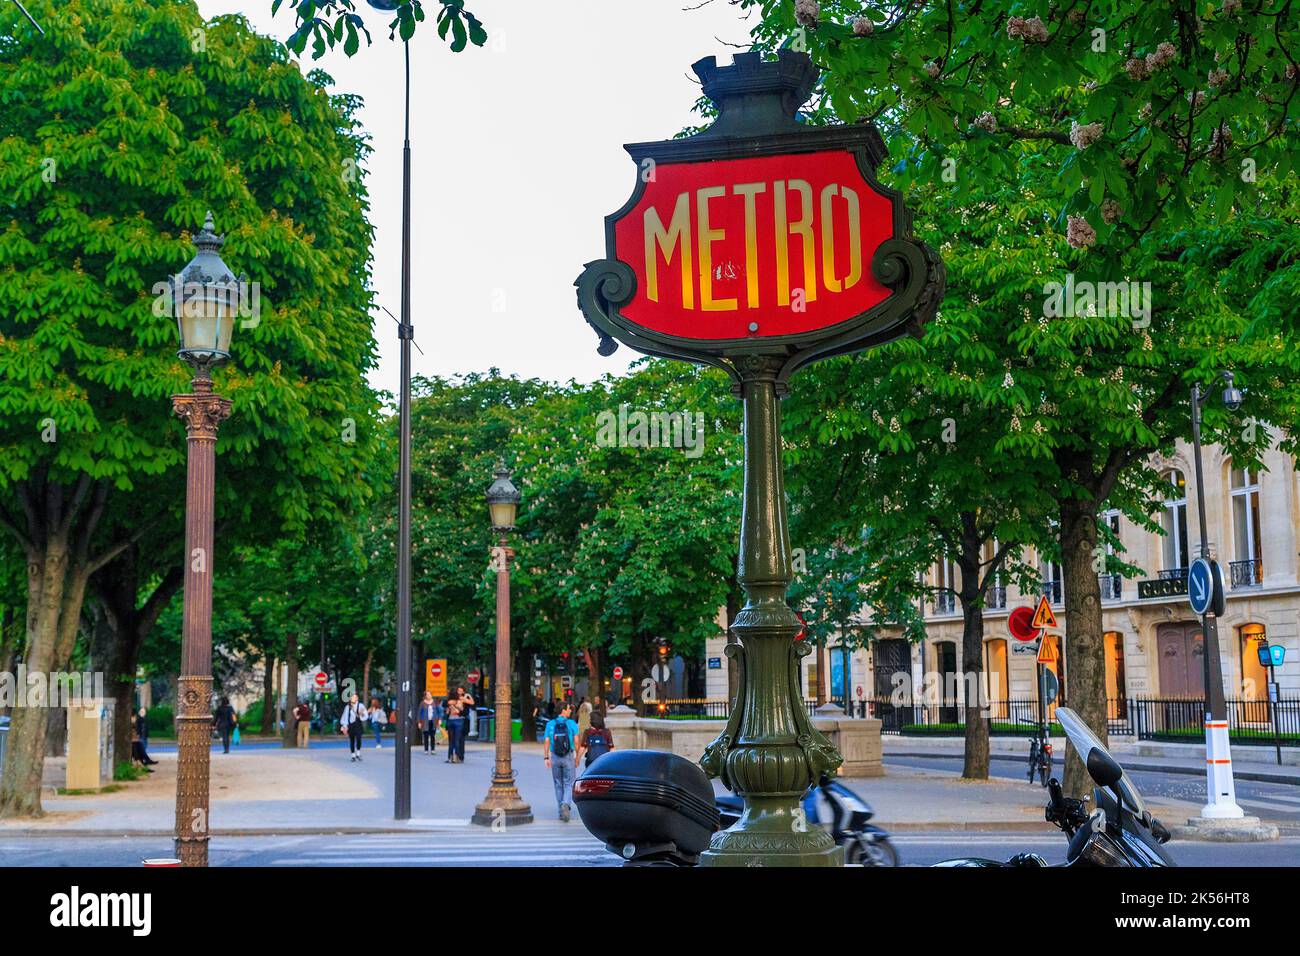 PARIS, FRANCE - MAY 11, 2015: This is one of the entrance signs to the Paris Metro. Stock Photo